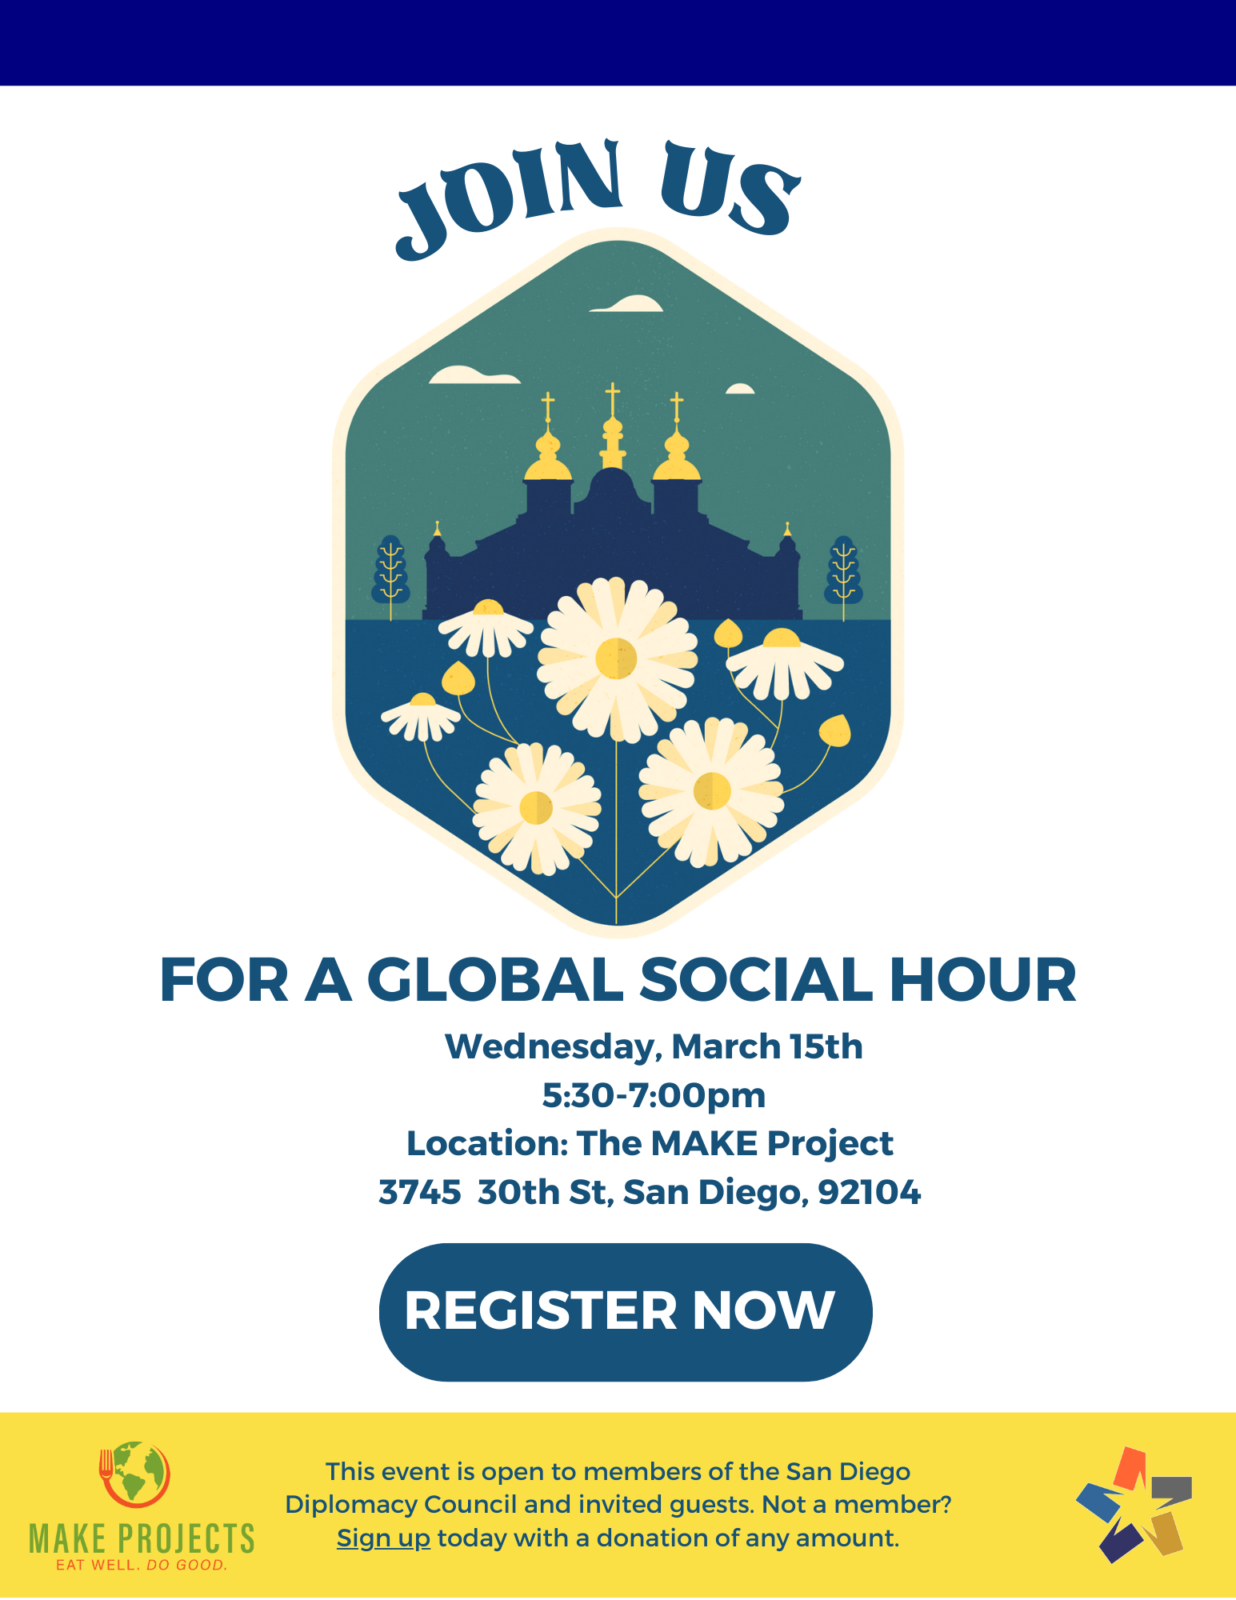 Ukrainian Business Leaders Global Social Hour flyer. A blue header bar, and yellow footer bar, with graphic image of Kyiv in tones of green, blue, and yellow in the center.